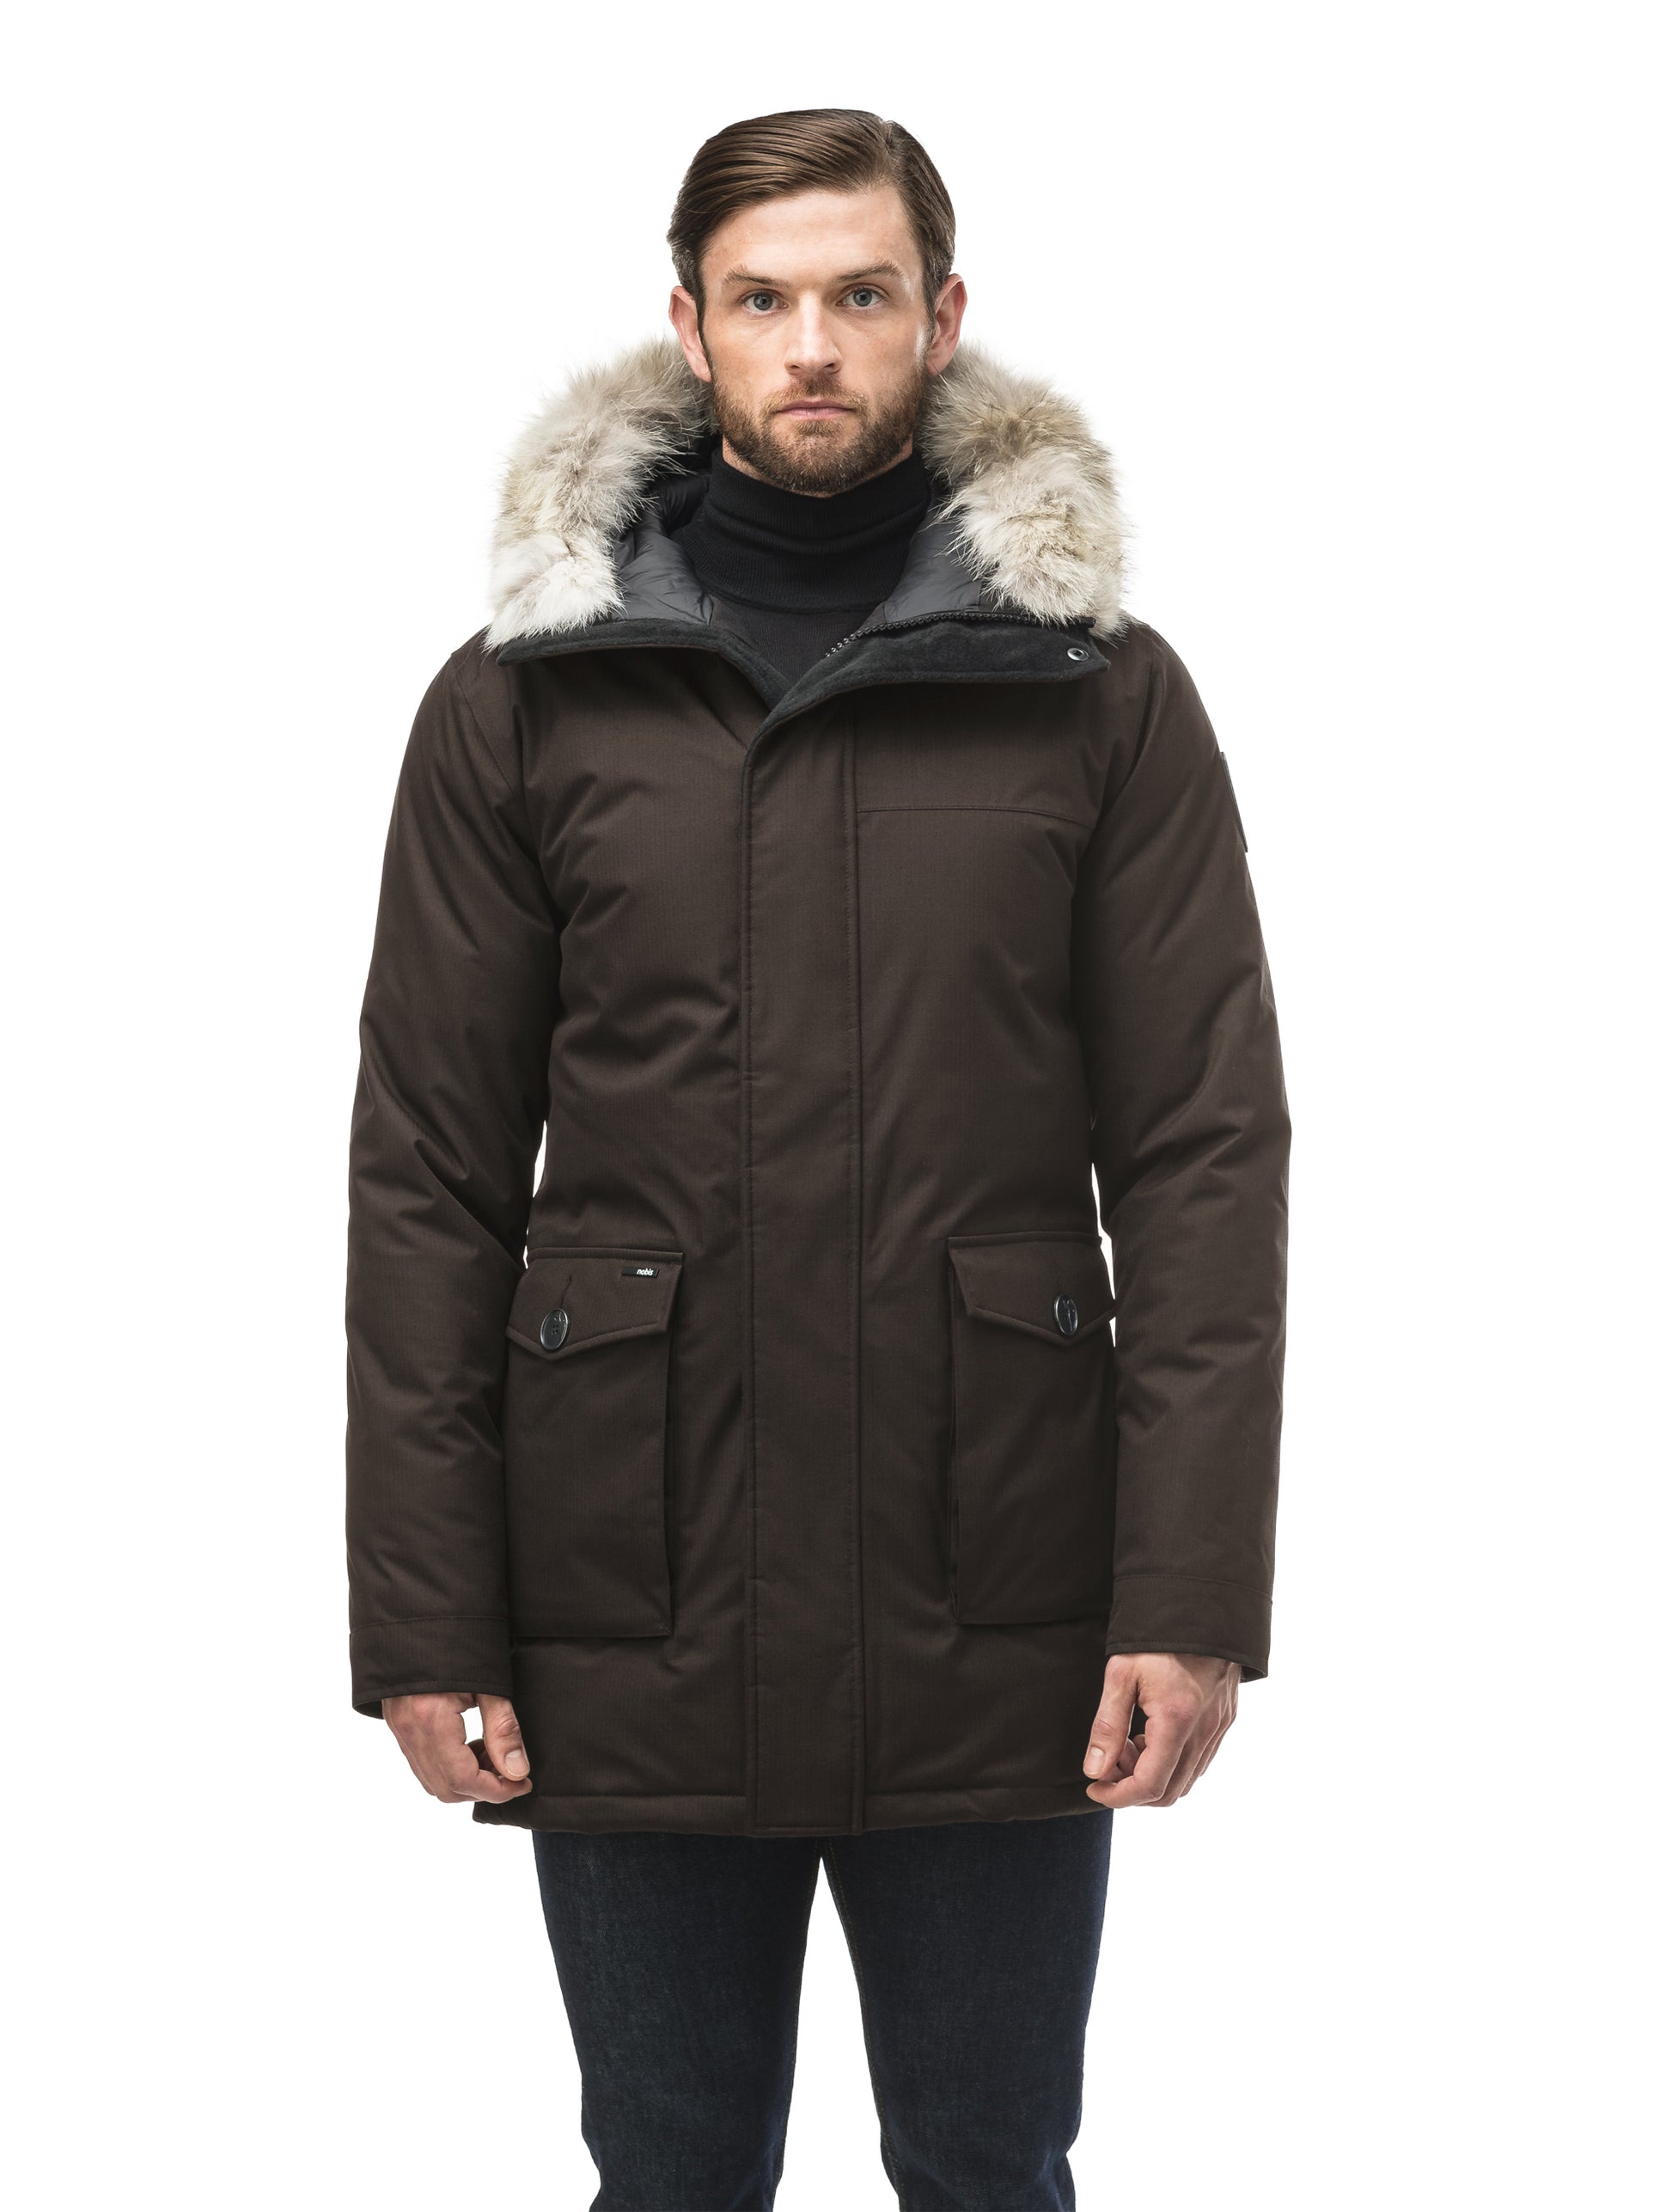 Men's slim fitting waist length parka with removable fur trim on the hood and two waist patch pockets in CH Brown